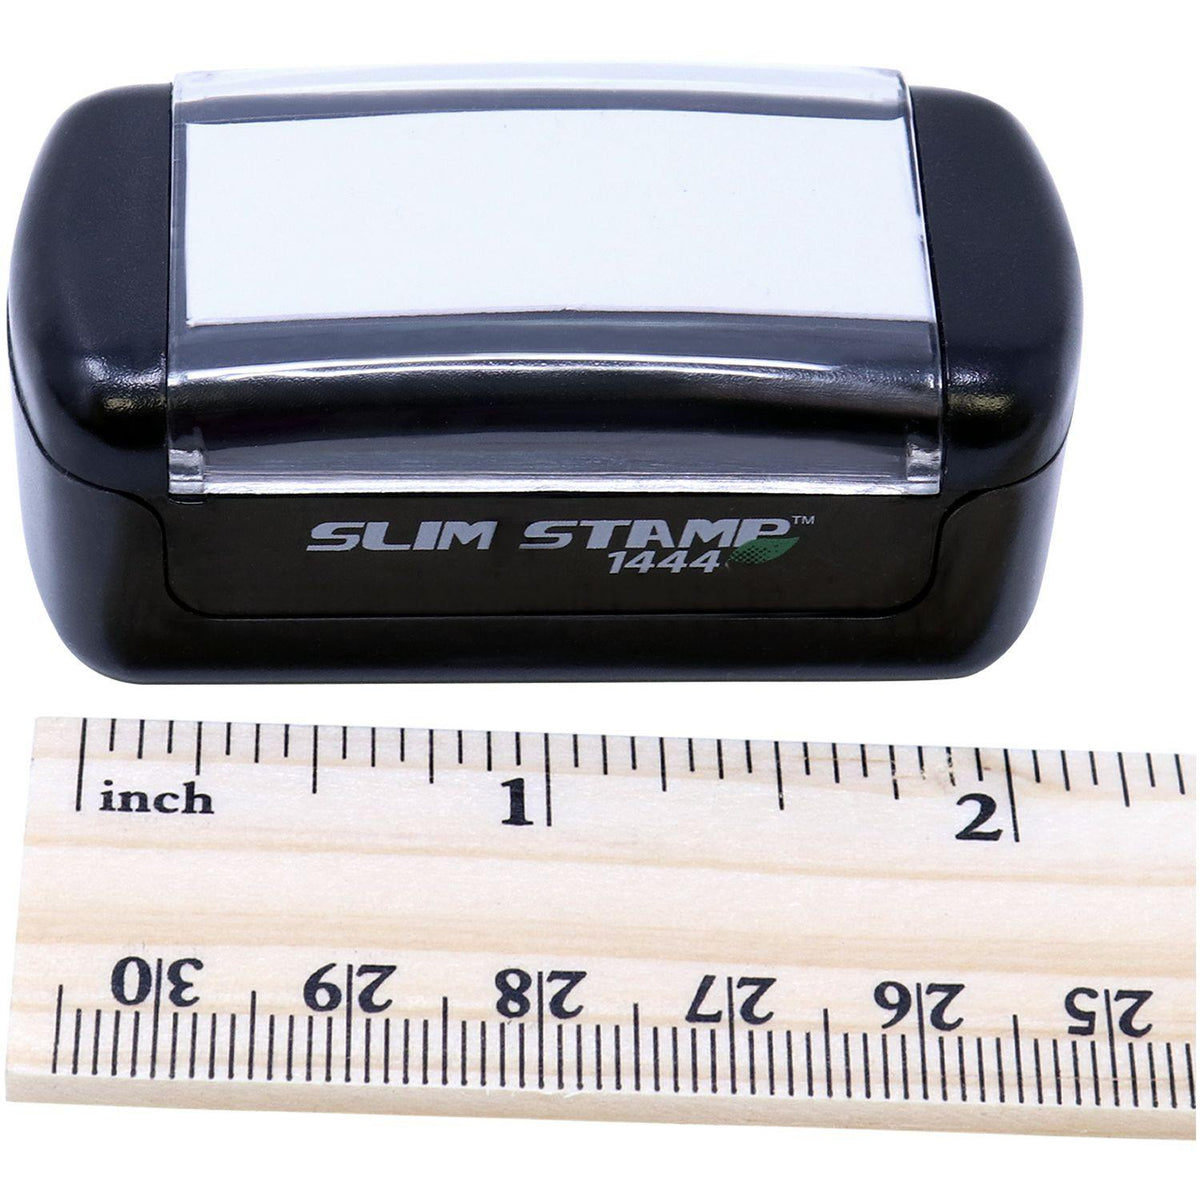 Measurement Slim Pre-Inked Completed with Checkbox Stamp with Ruler